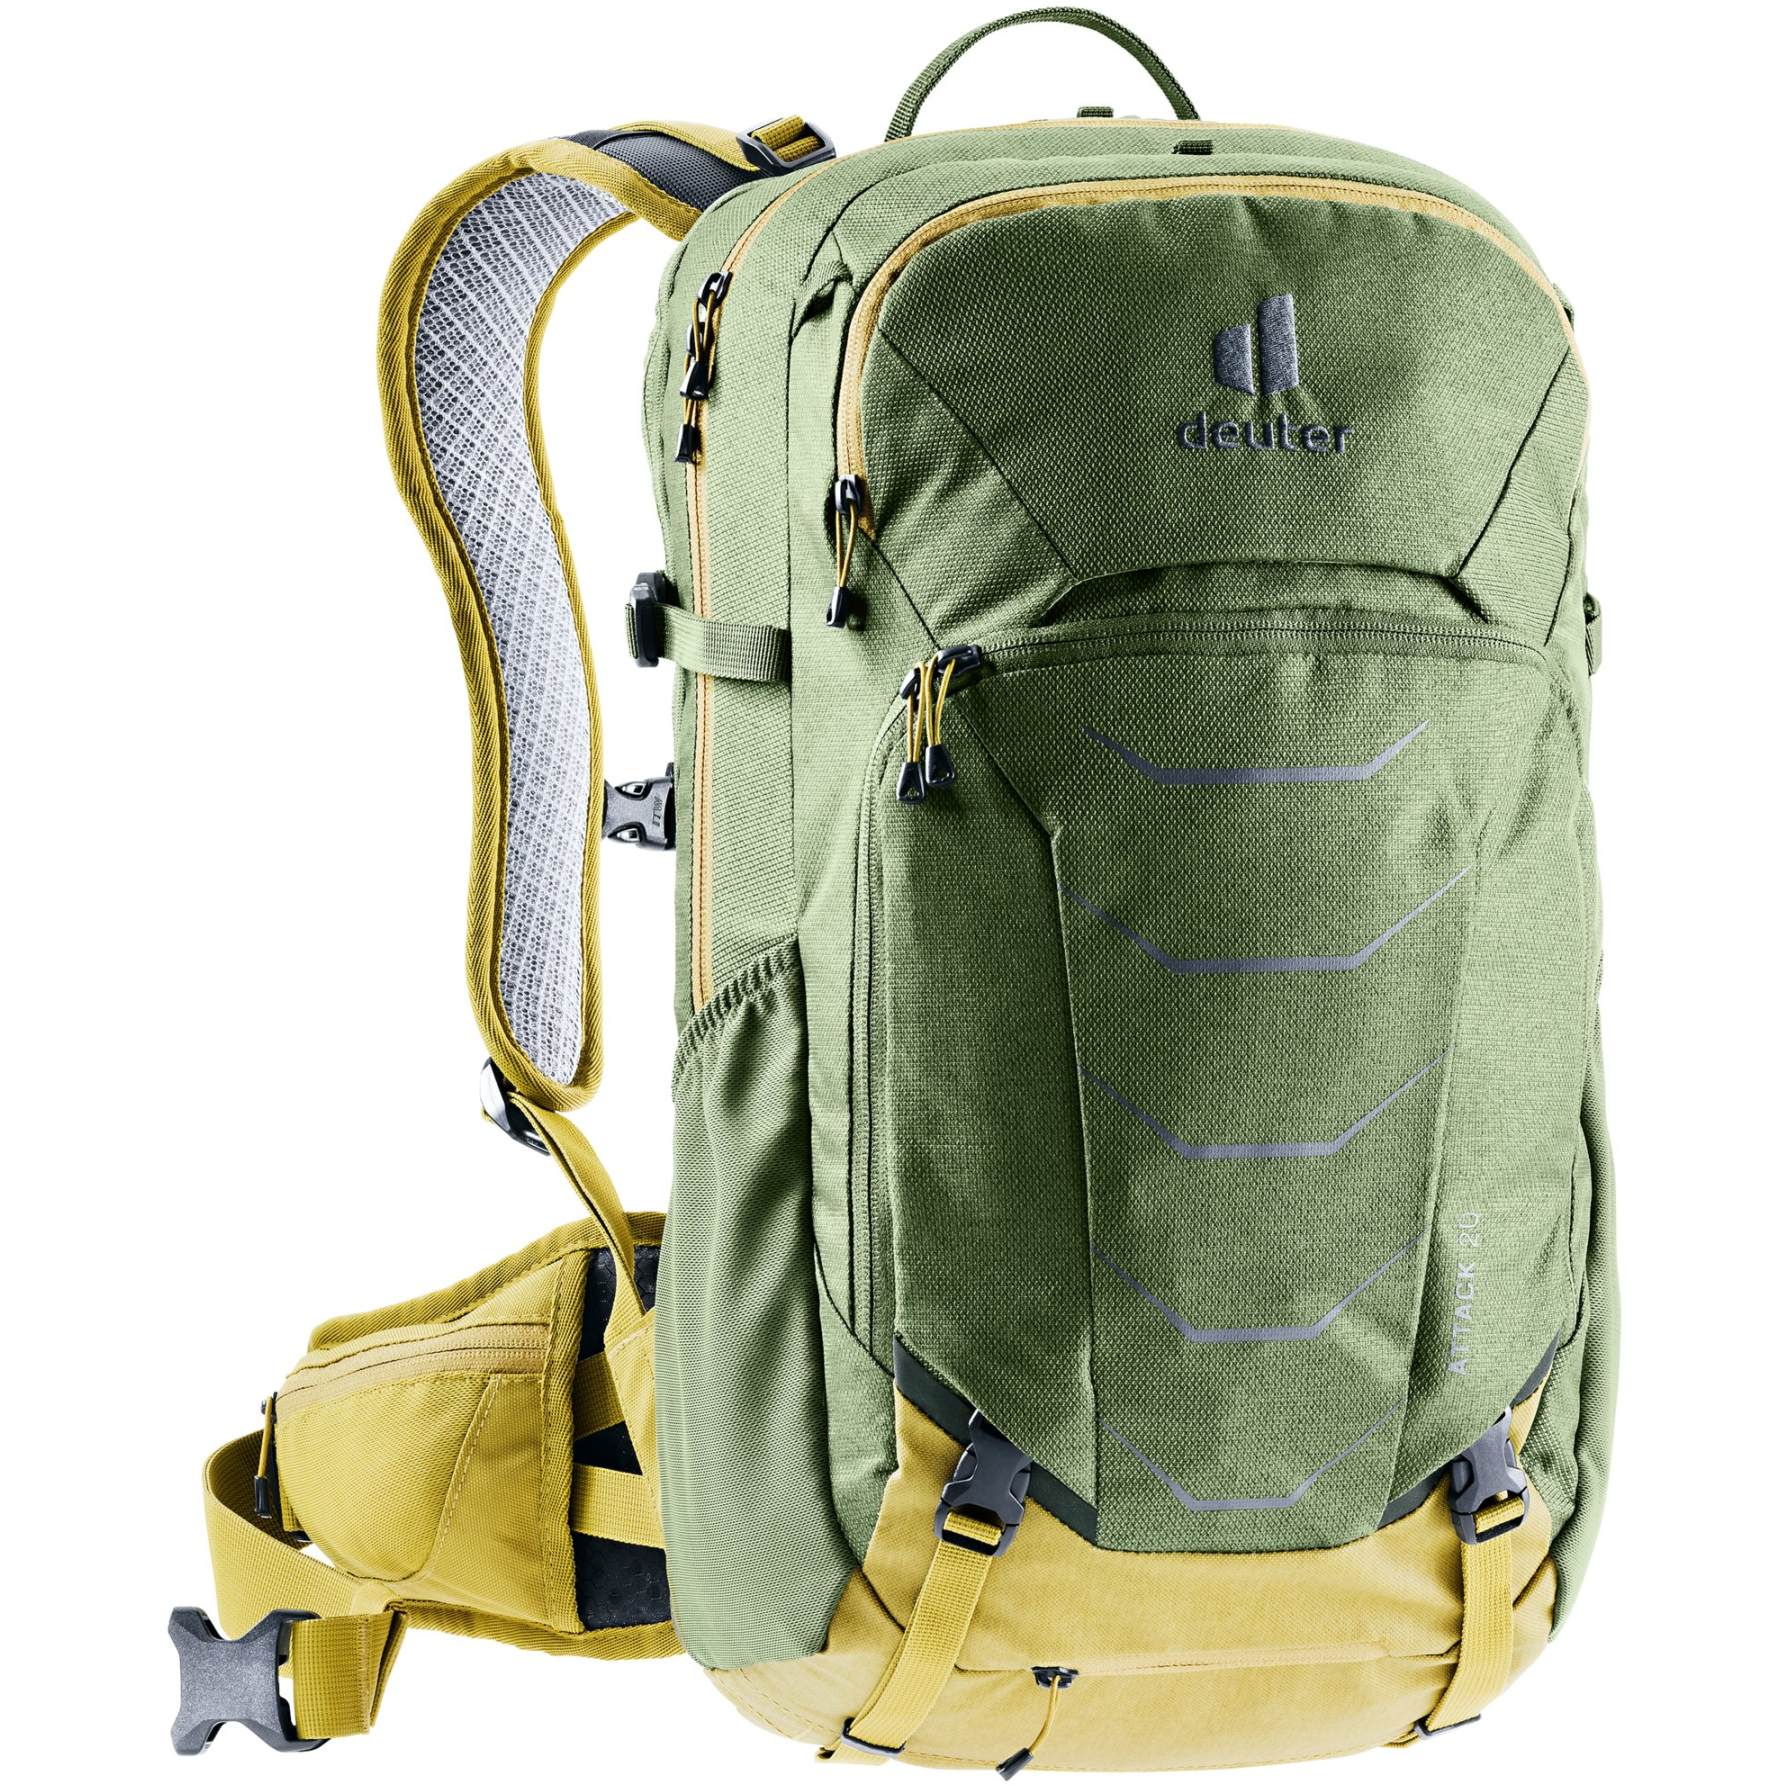 Picture of Deuter Attack 20 Protector Backpack - khaki-turmeric